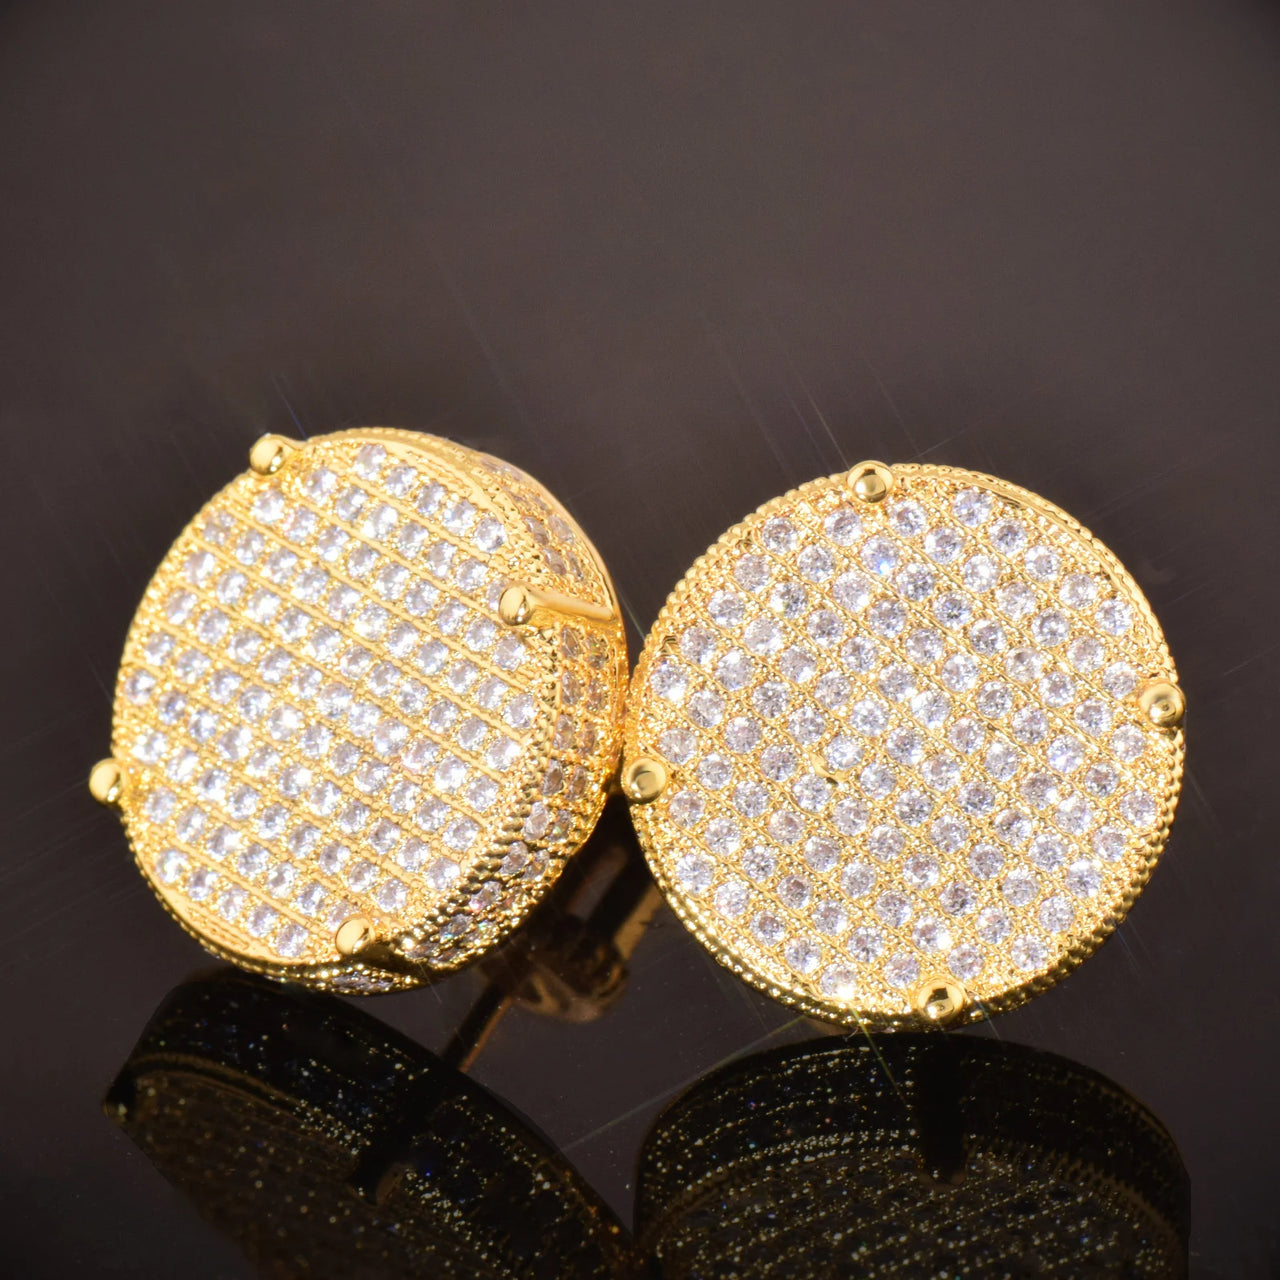 14mm Big Round Cut Pave Earrings - Different Drips